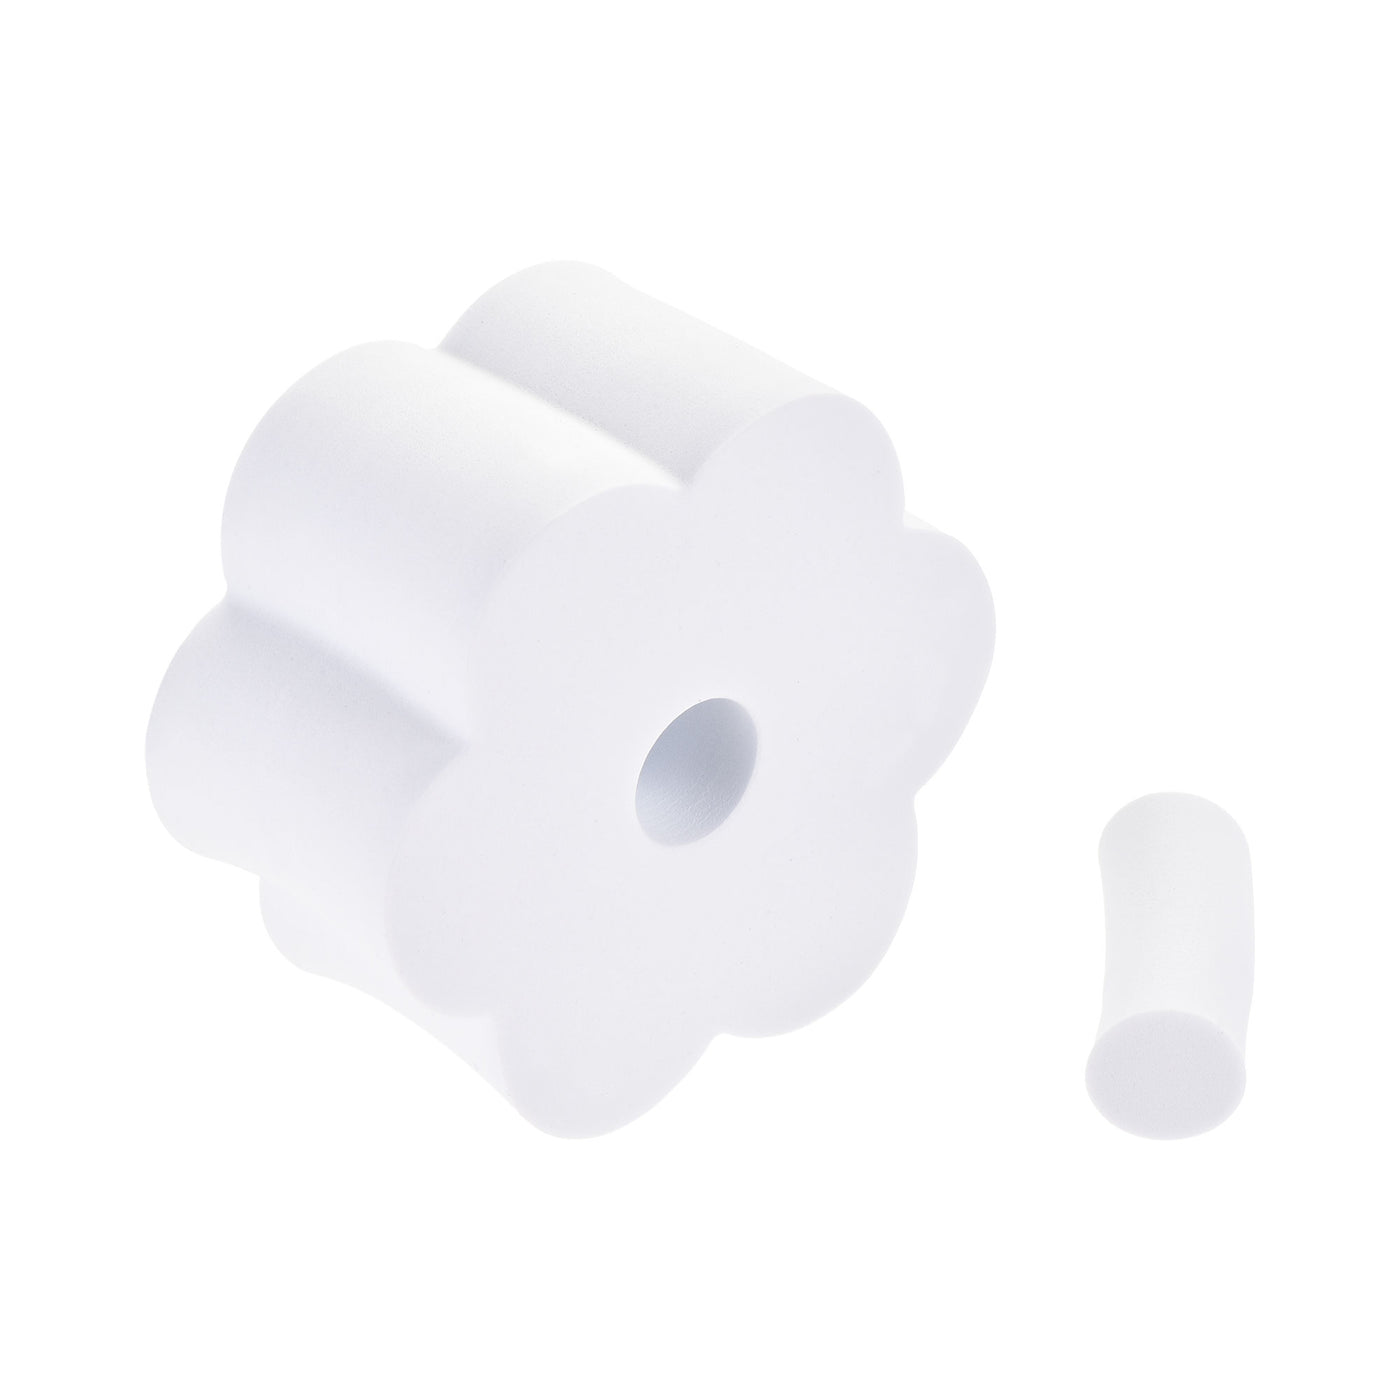 uxcell Uxcell Cup Turner Foam 3.74 Inch Diameter Foam Inserts White for 3/4 Inch PVC Pipe 6Pcs